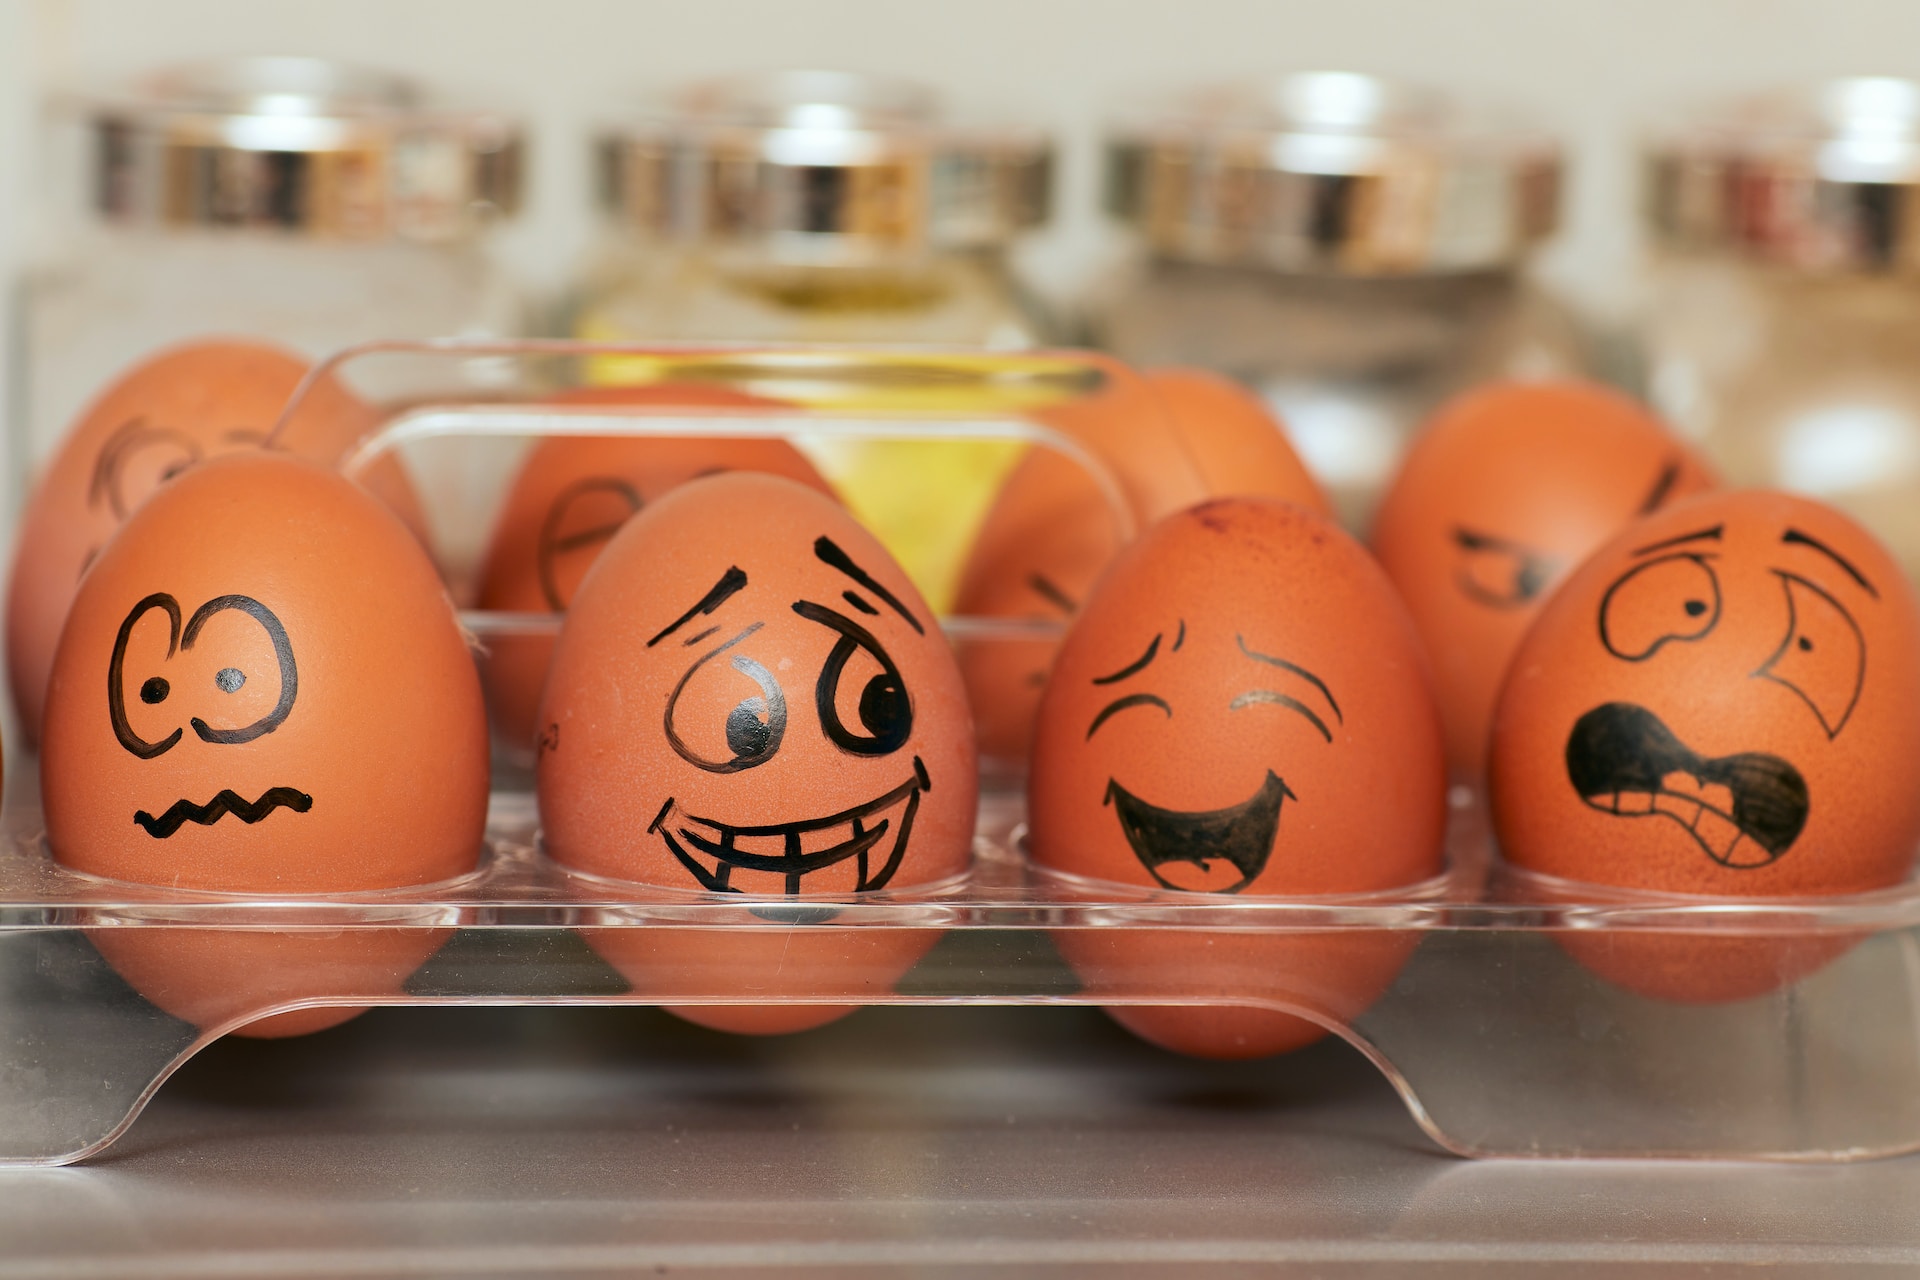 There are eight eggs with different faces, showing different emotions and moods.